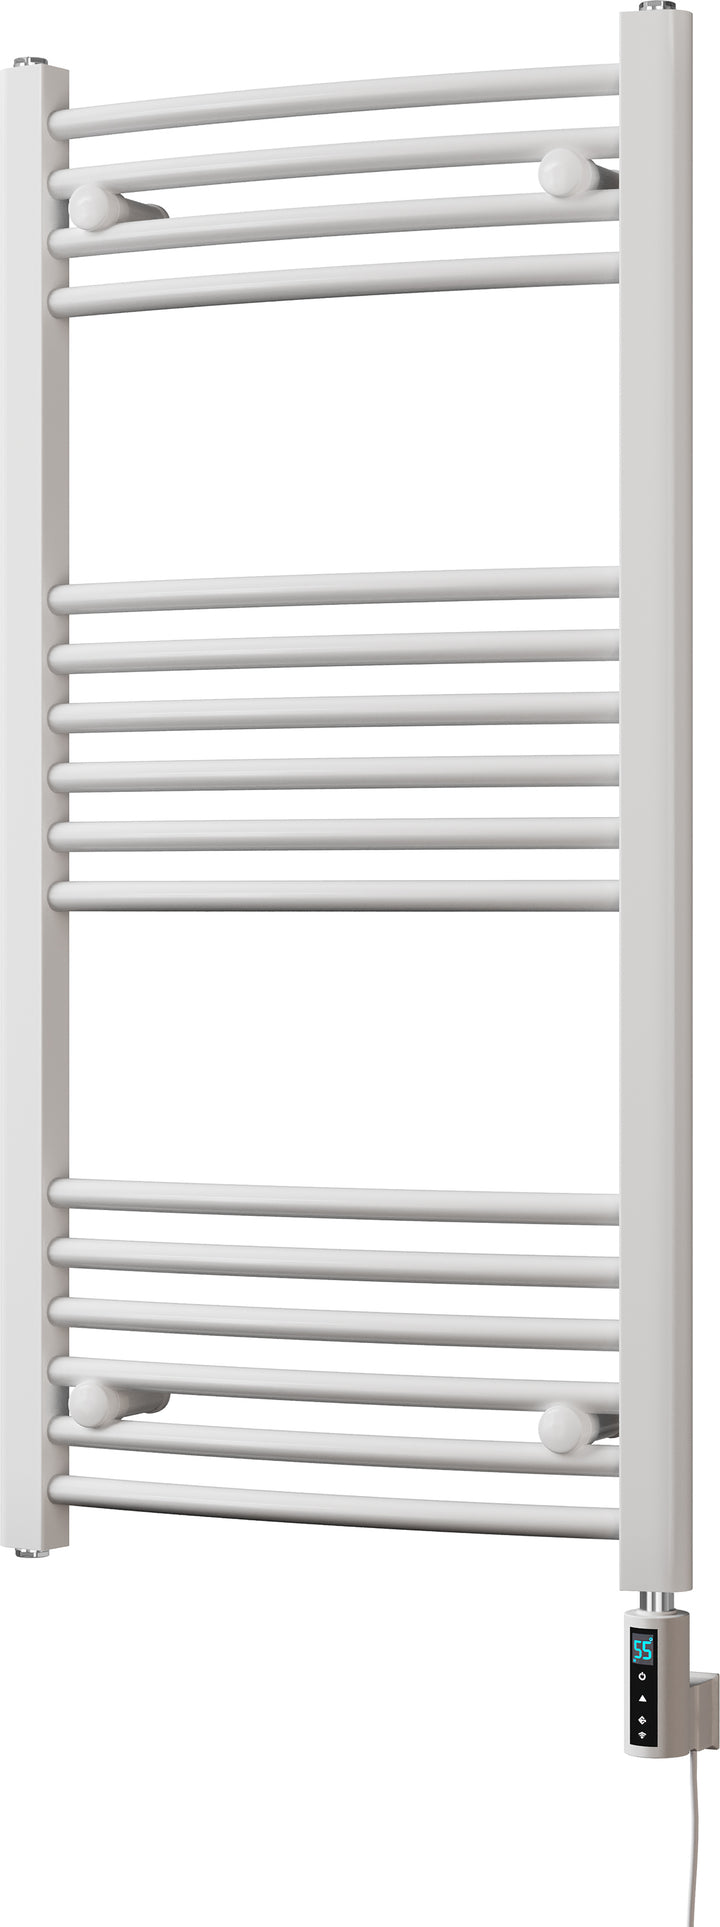 Zennor - White Electric Towel Rail H1000mm x W500mm Curved 300w Thermostatic WIFI